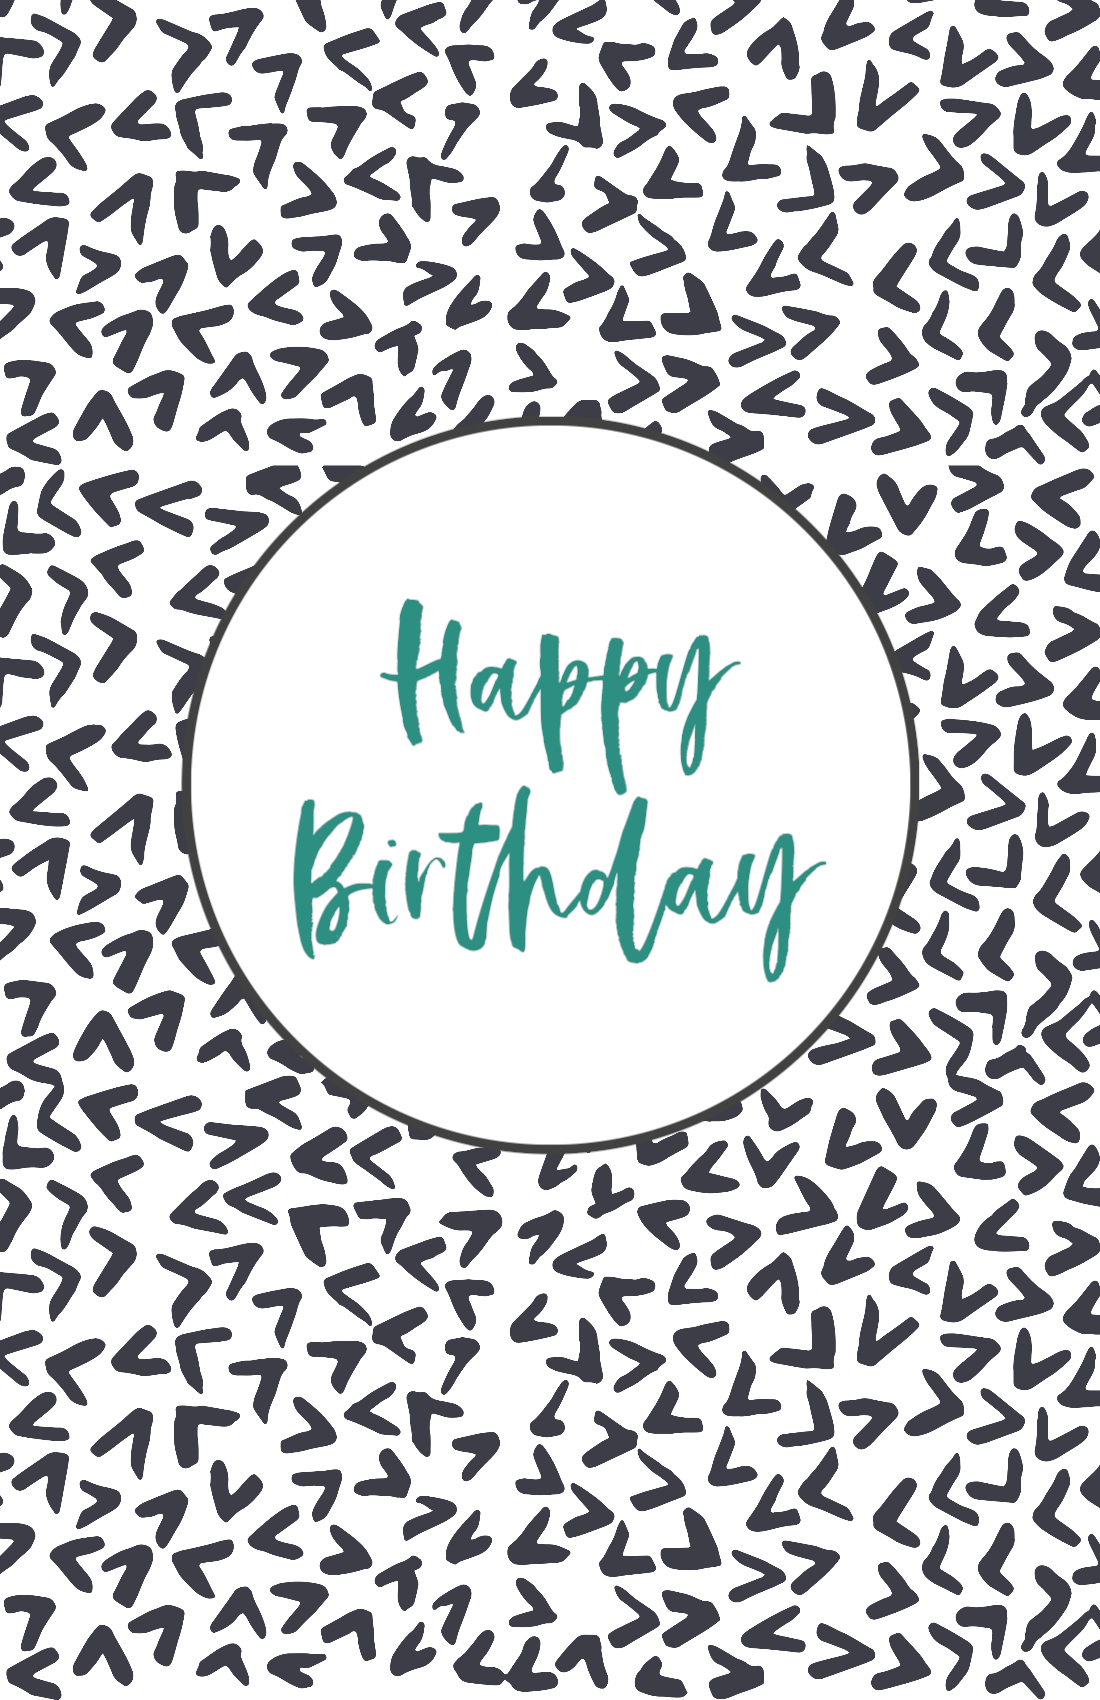 Download Free Printable Birthday Cards | Paper Trail Design